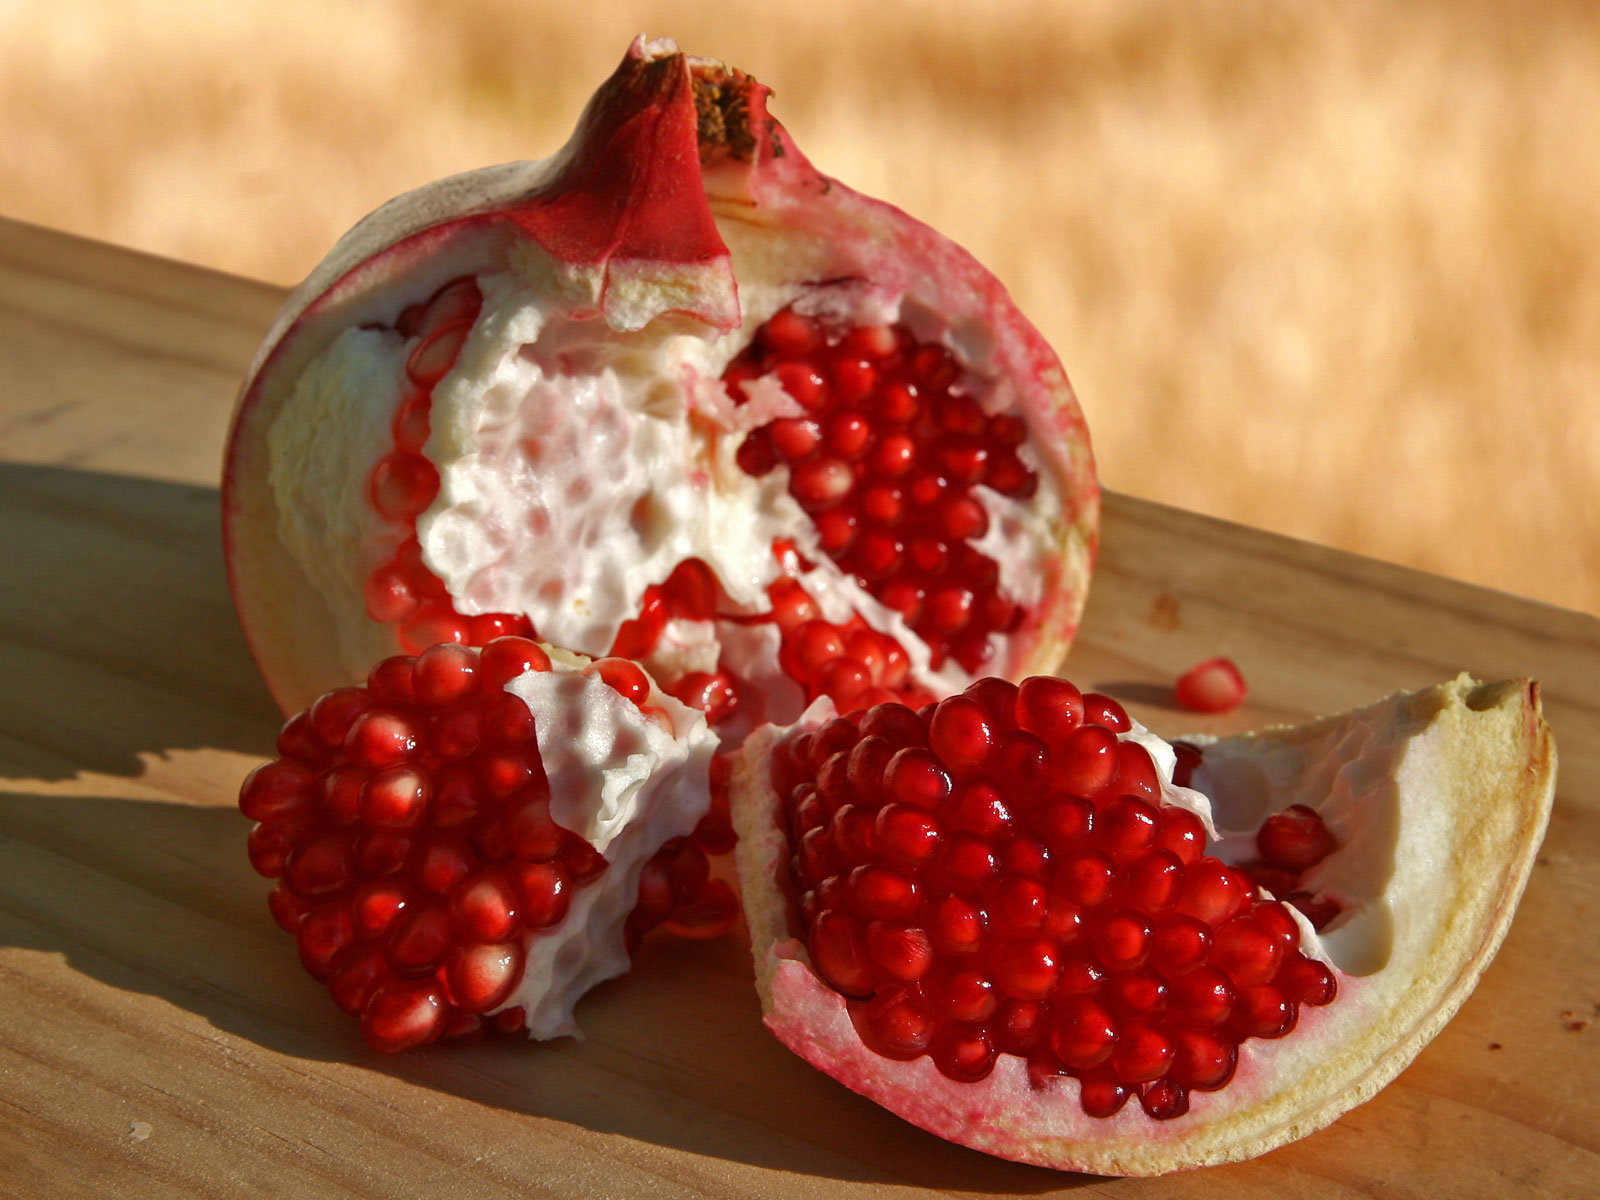 Pomegranate: Seeds in a sarcotesta